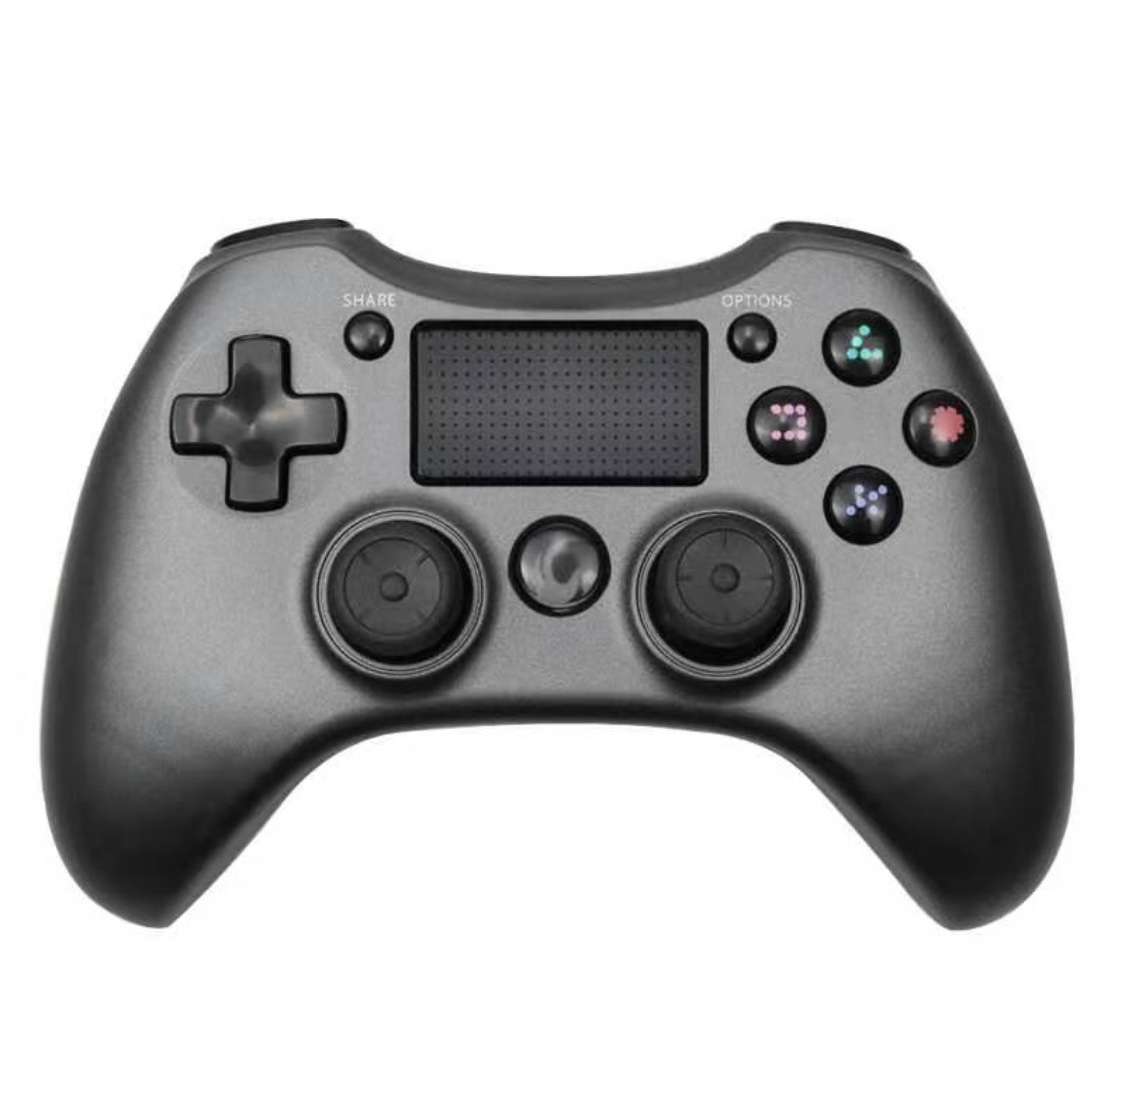 is garrys mod ps4 controller compatable